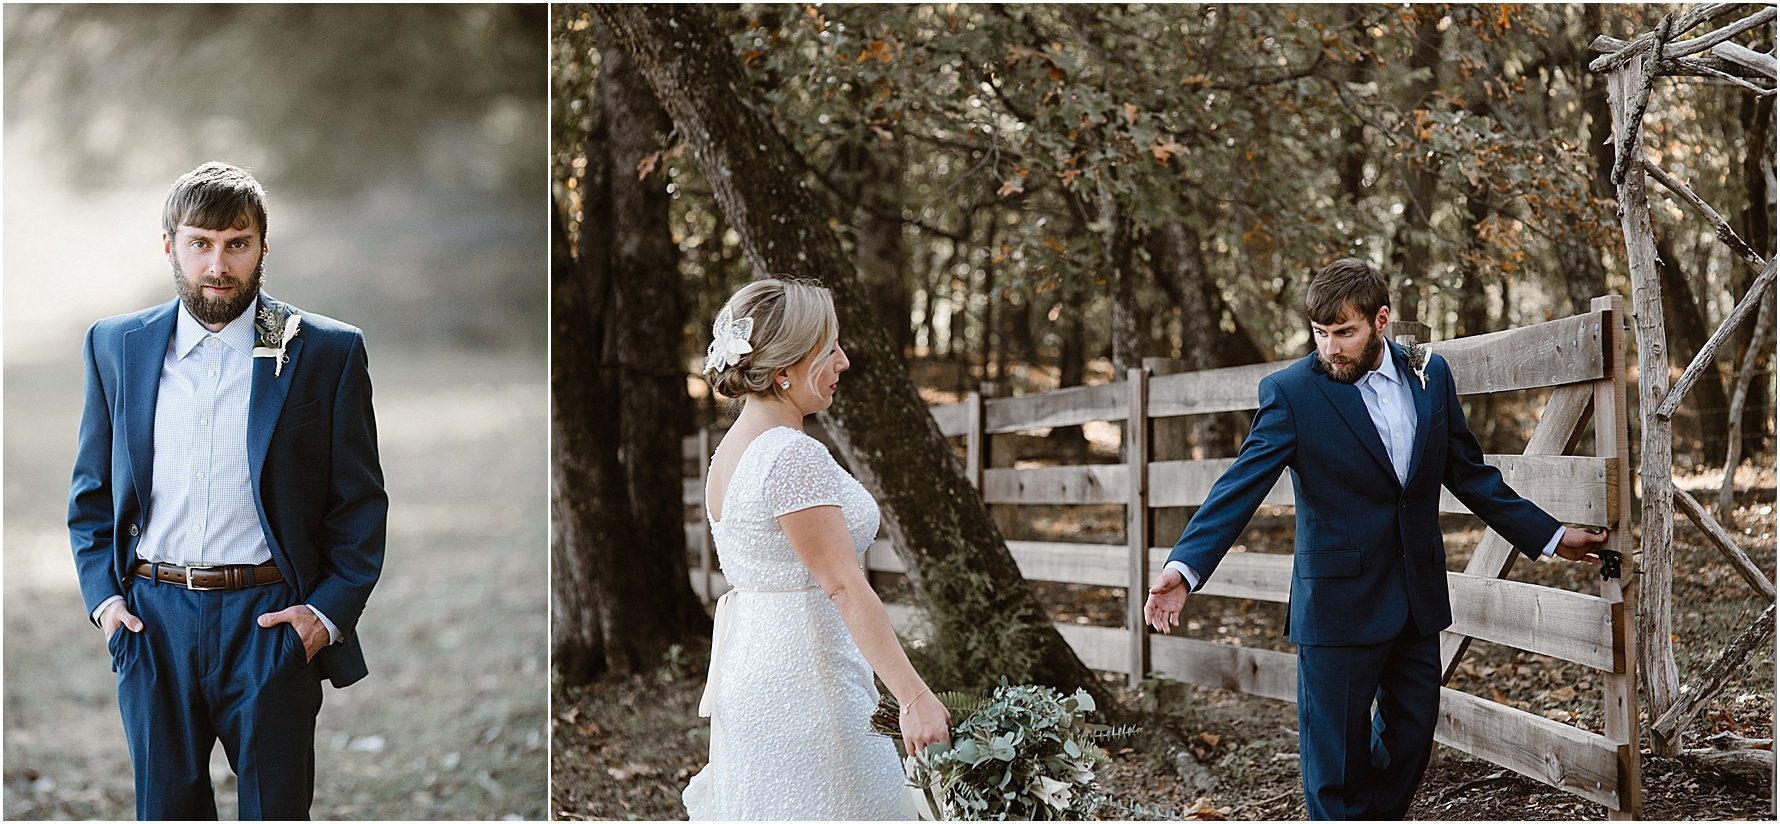 Forest Wedding Venues in Knoxville | Erin Morrison Photography www.erinmorrisonphotography.com